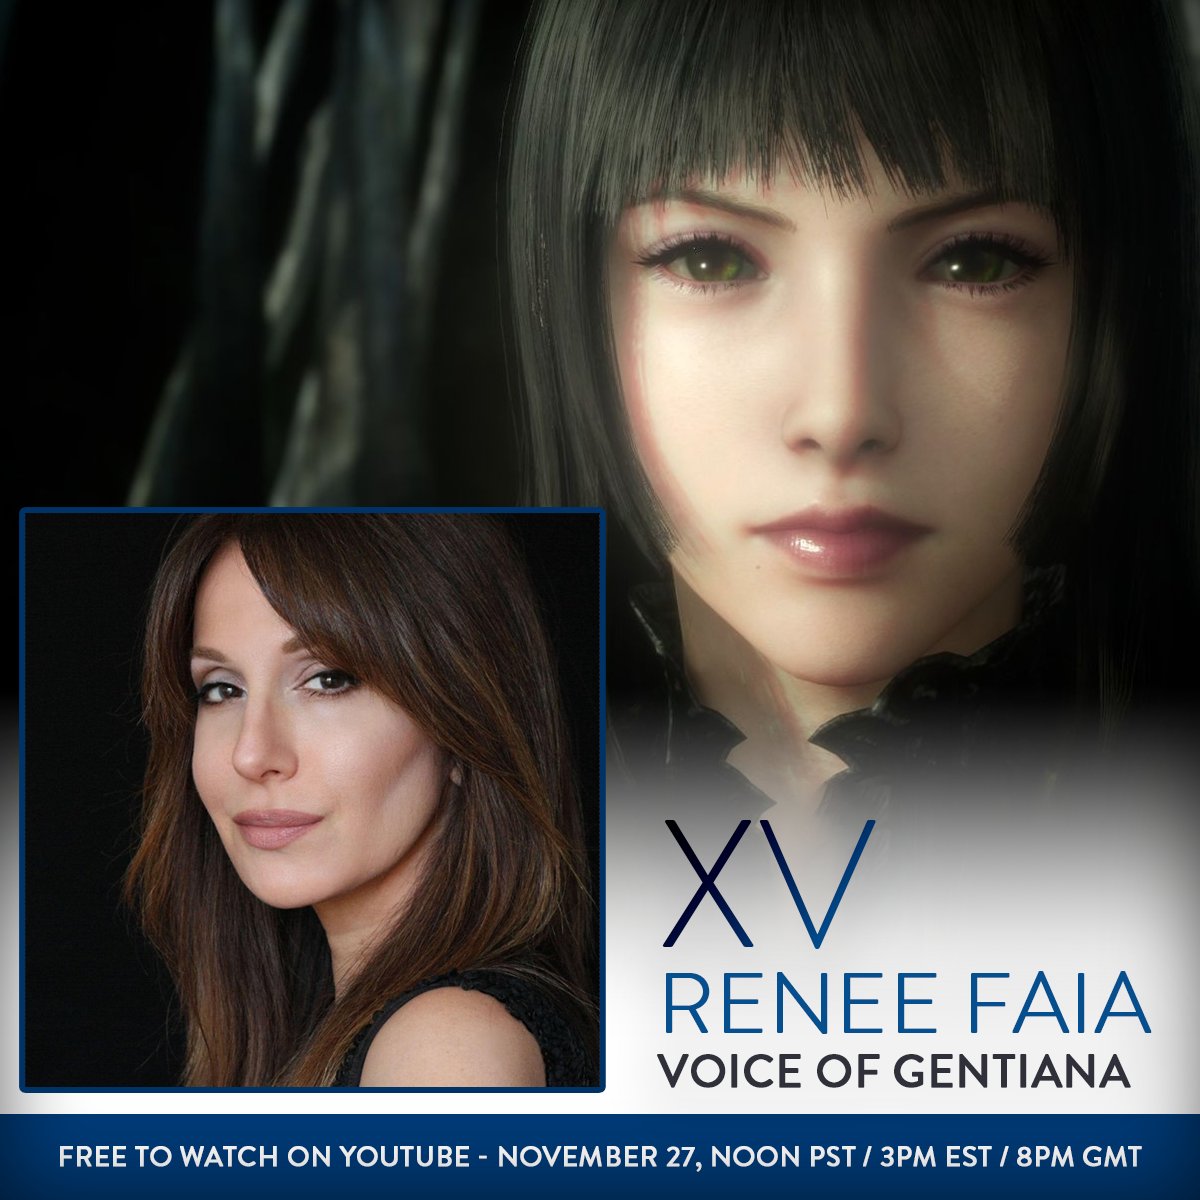 Time for another #FFXV 5-year Anniversary guest announcement! We'll be joined by @reneefaia, the voice of Gentiana. youtu.be/Hs9lNSDP1BY